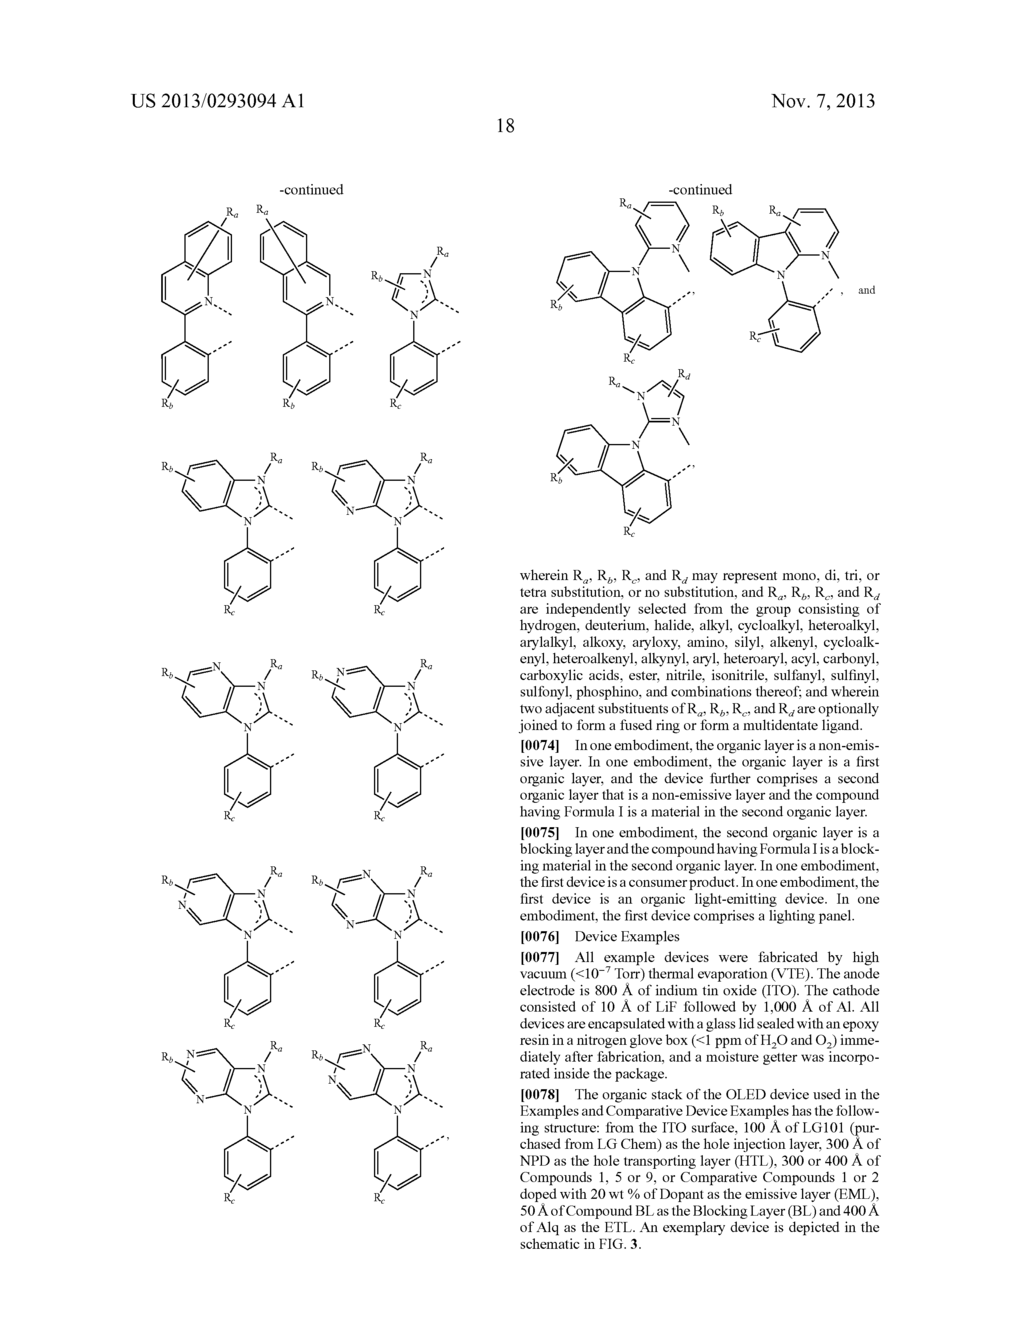 Asymmetric Hosts With Triaryl Silane Side Chains - diagram, schematic, and image 23